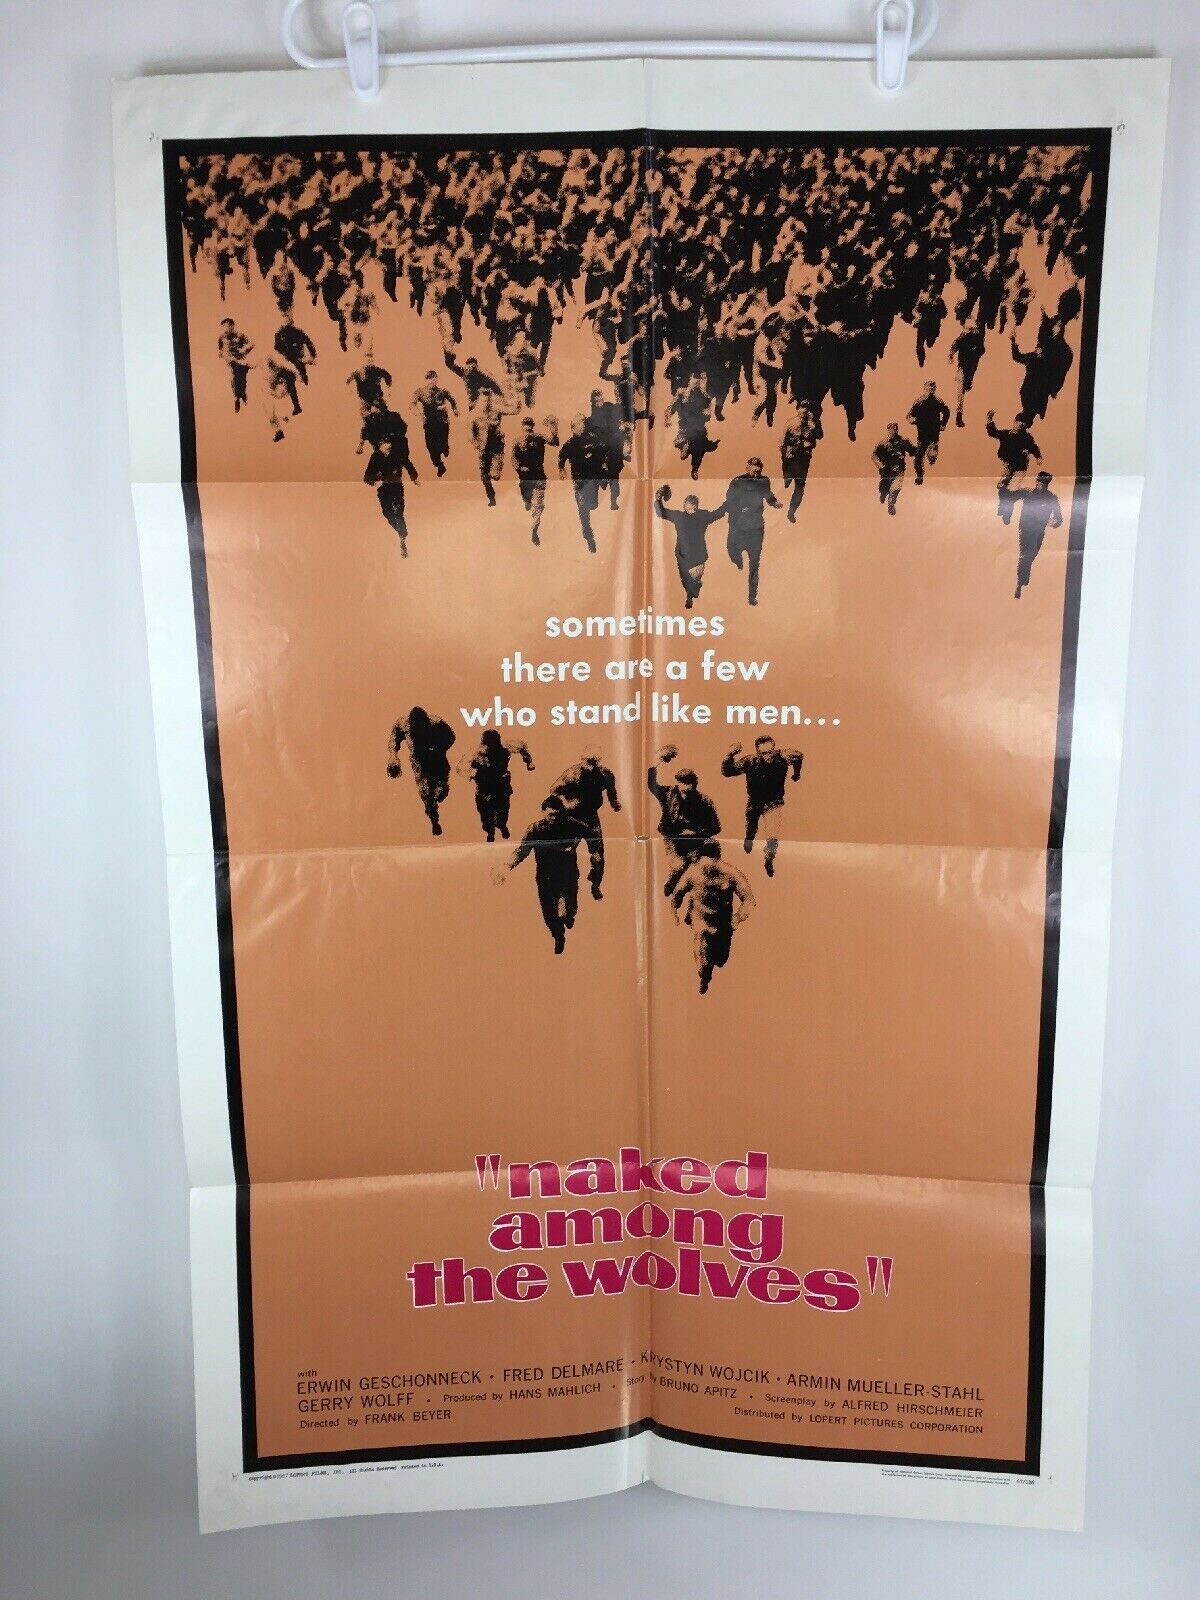 1967 Naked Among The Wolves Original 1 Sheet Movie Theater Poster 27 X 41